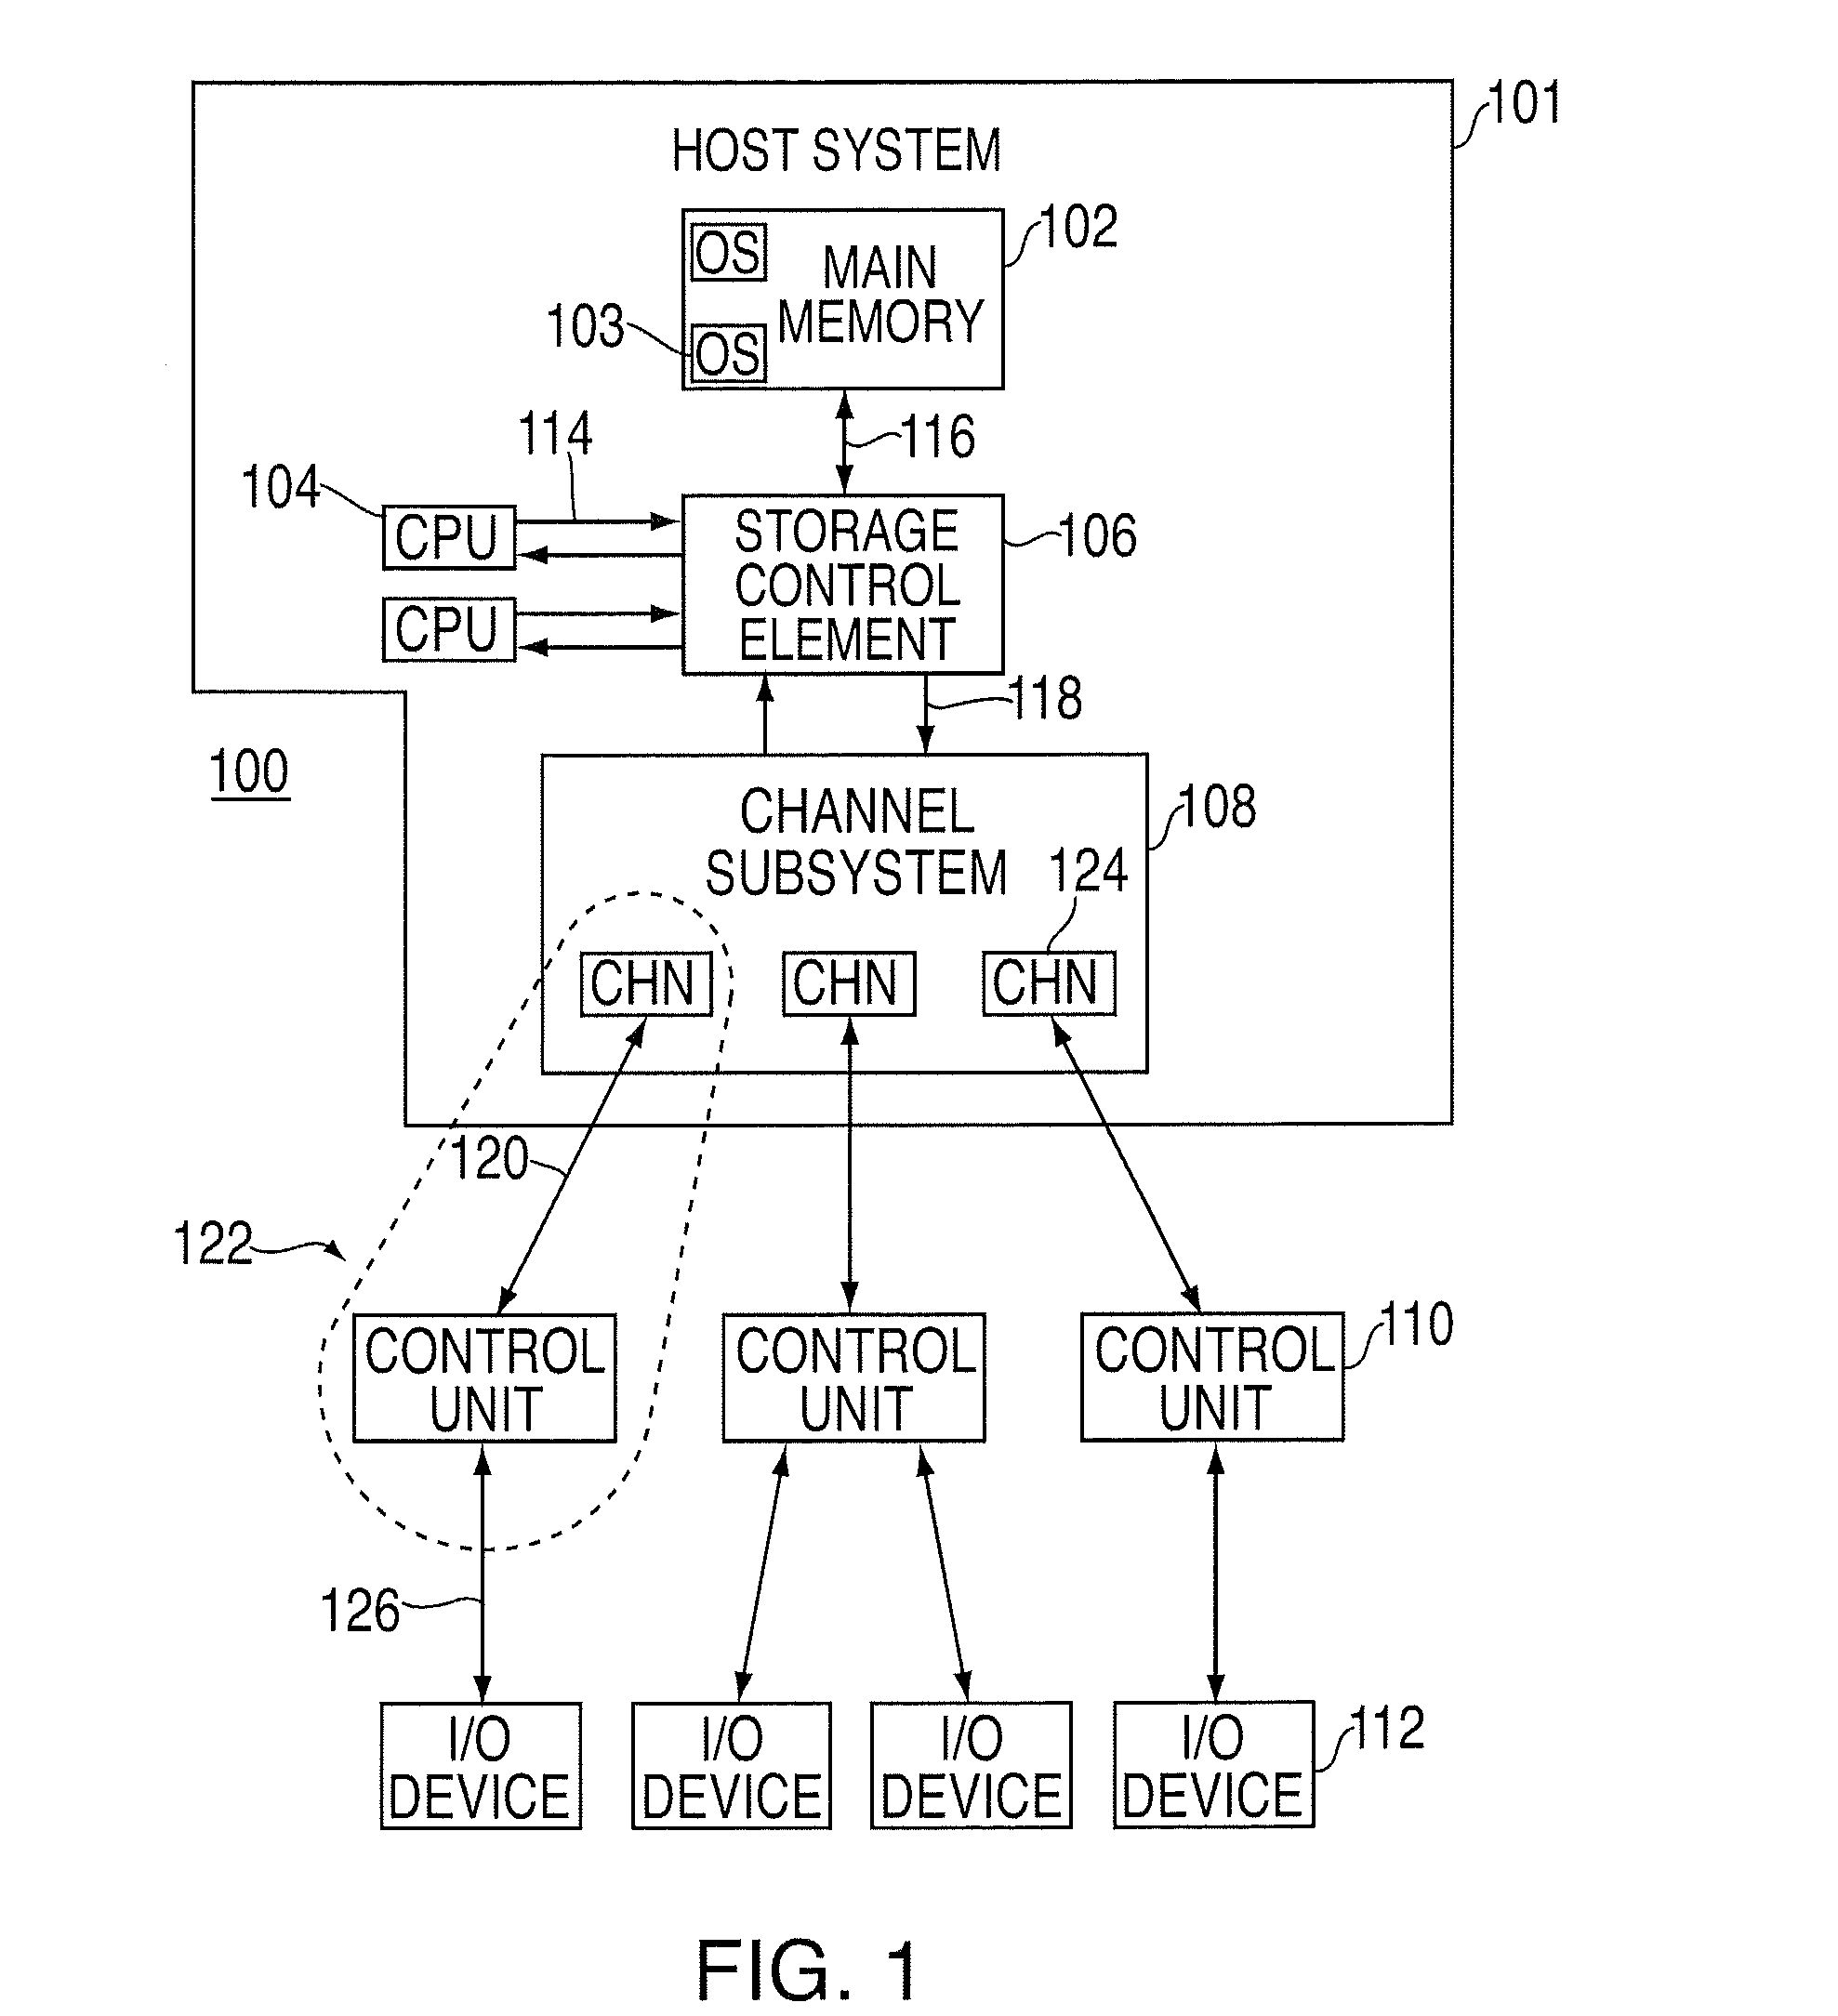 Processing communication data in a ships passing condition